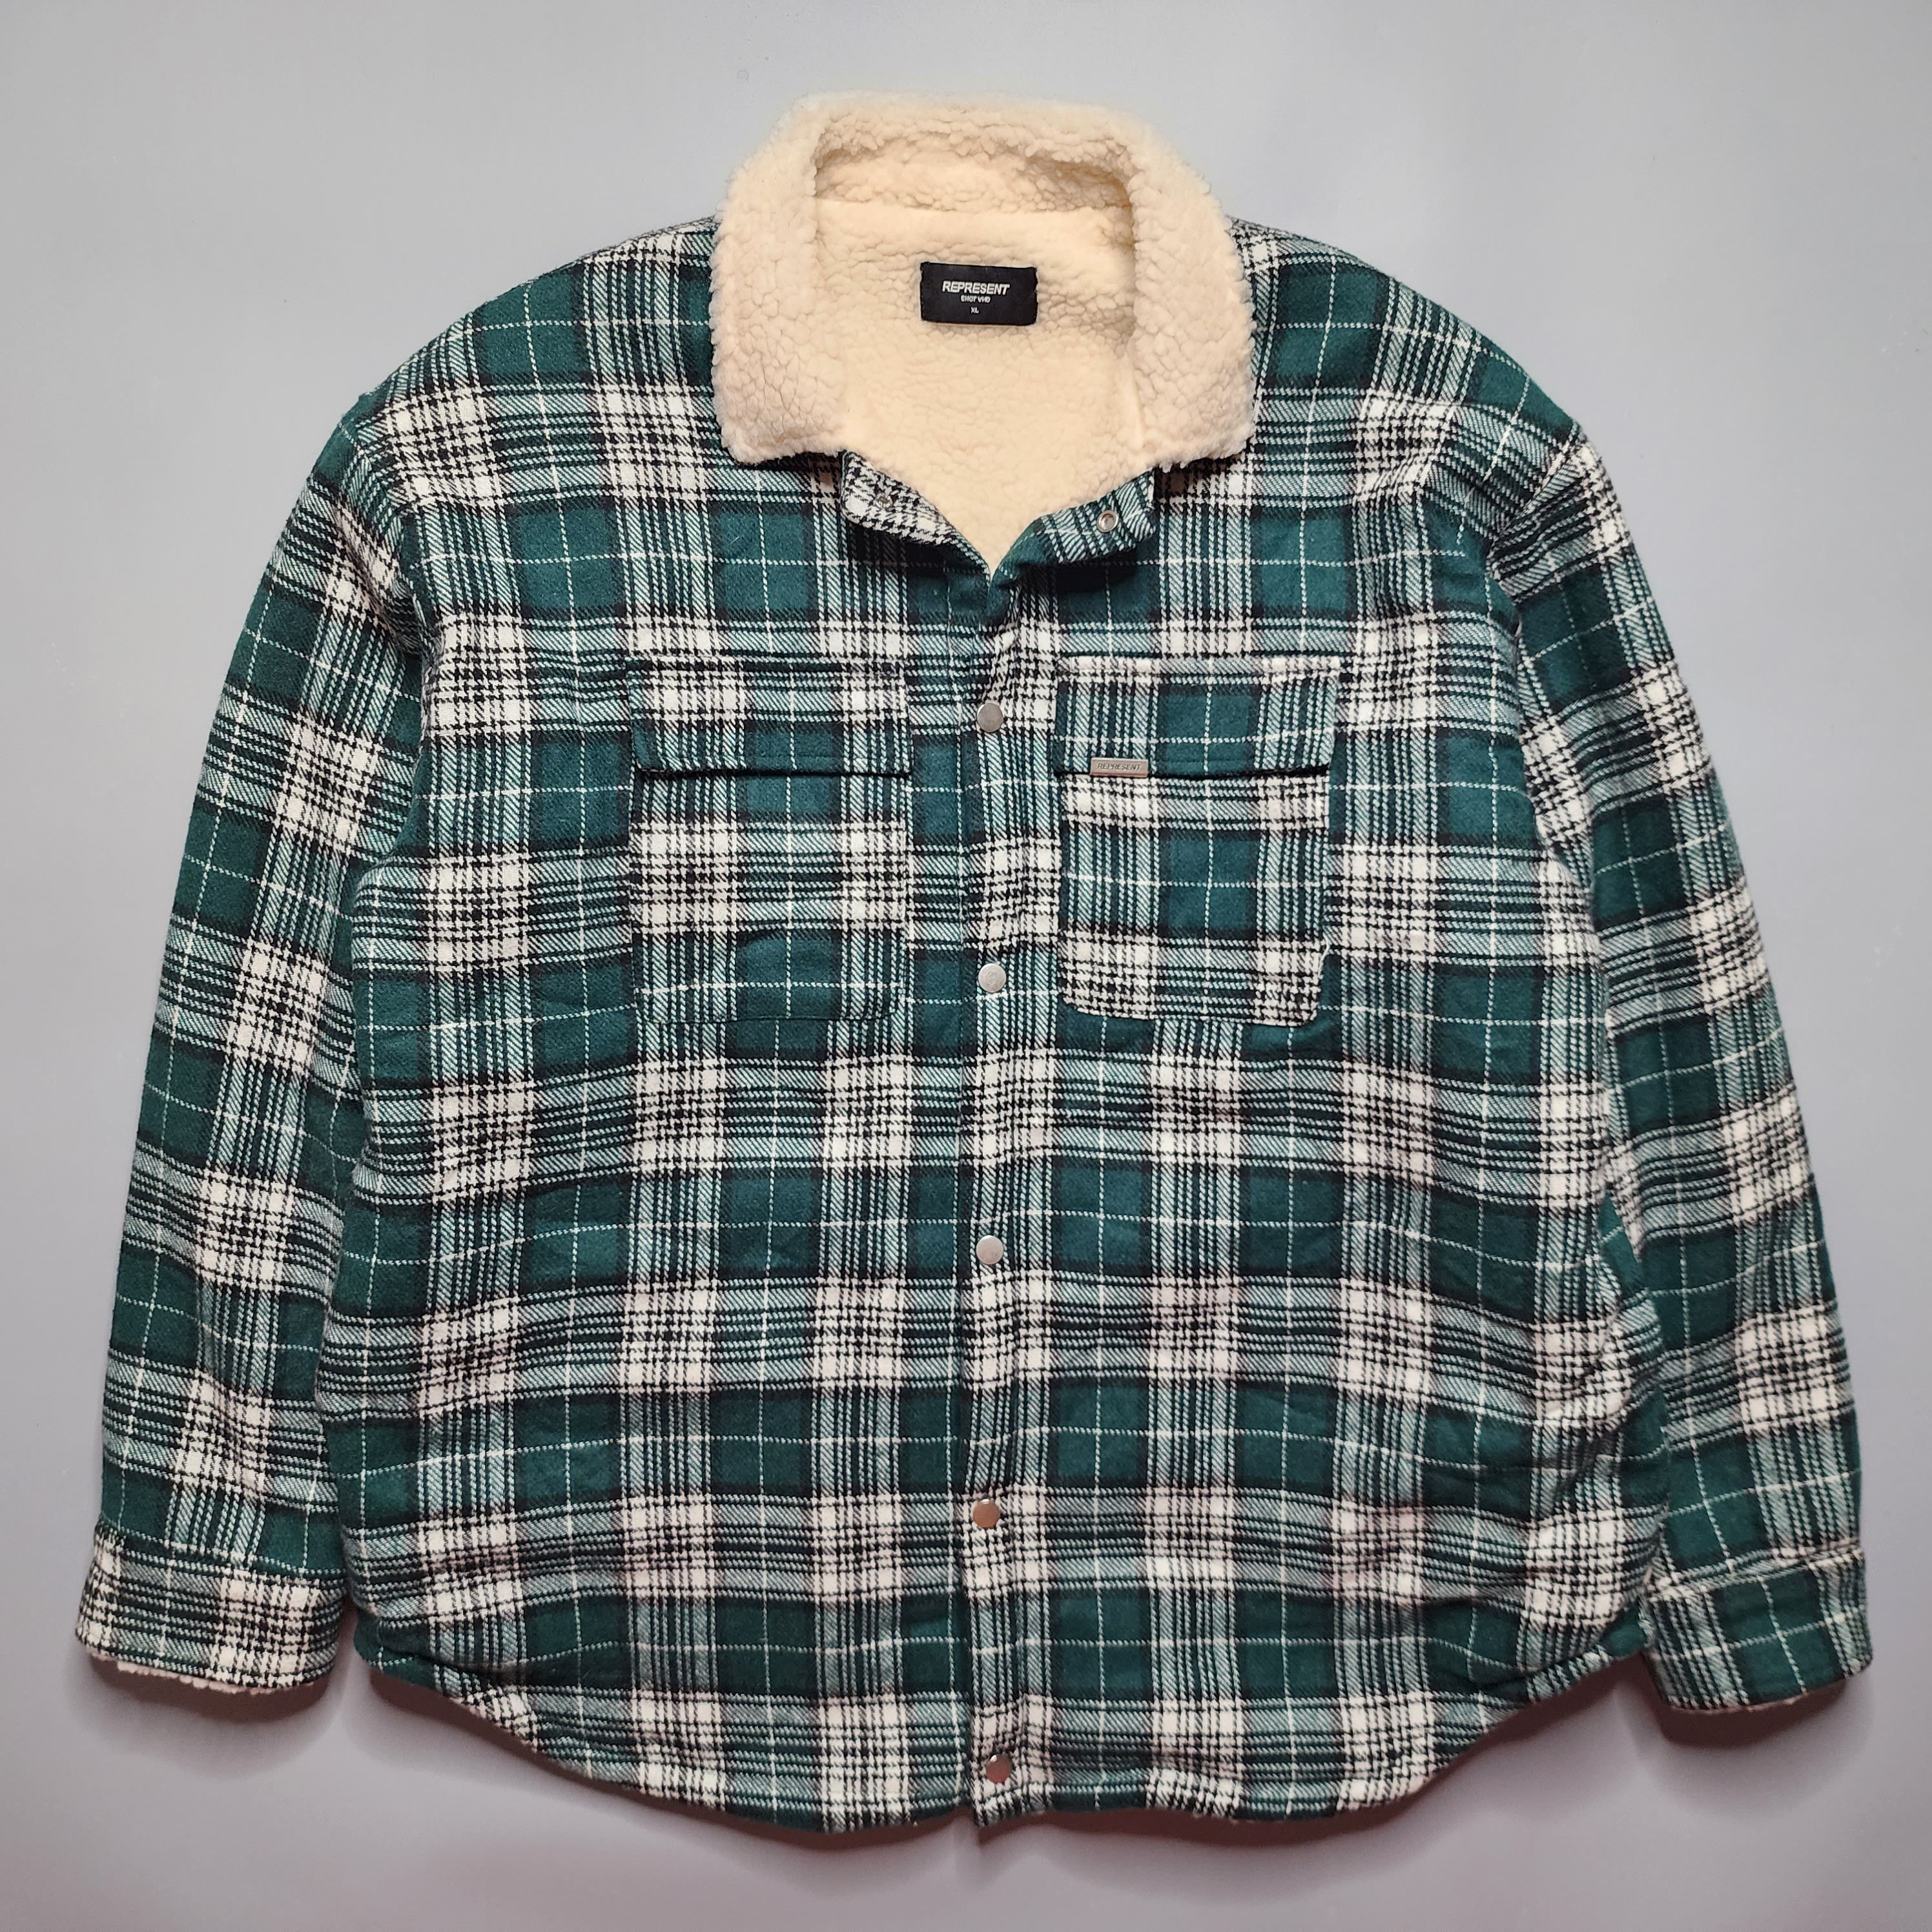 Represent Clo. Represent - Sherpa Flannel Overshirt Jacket | Grailed